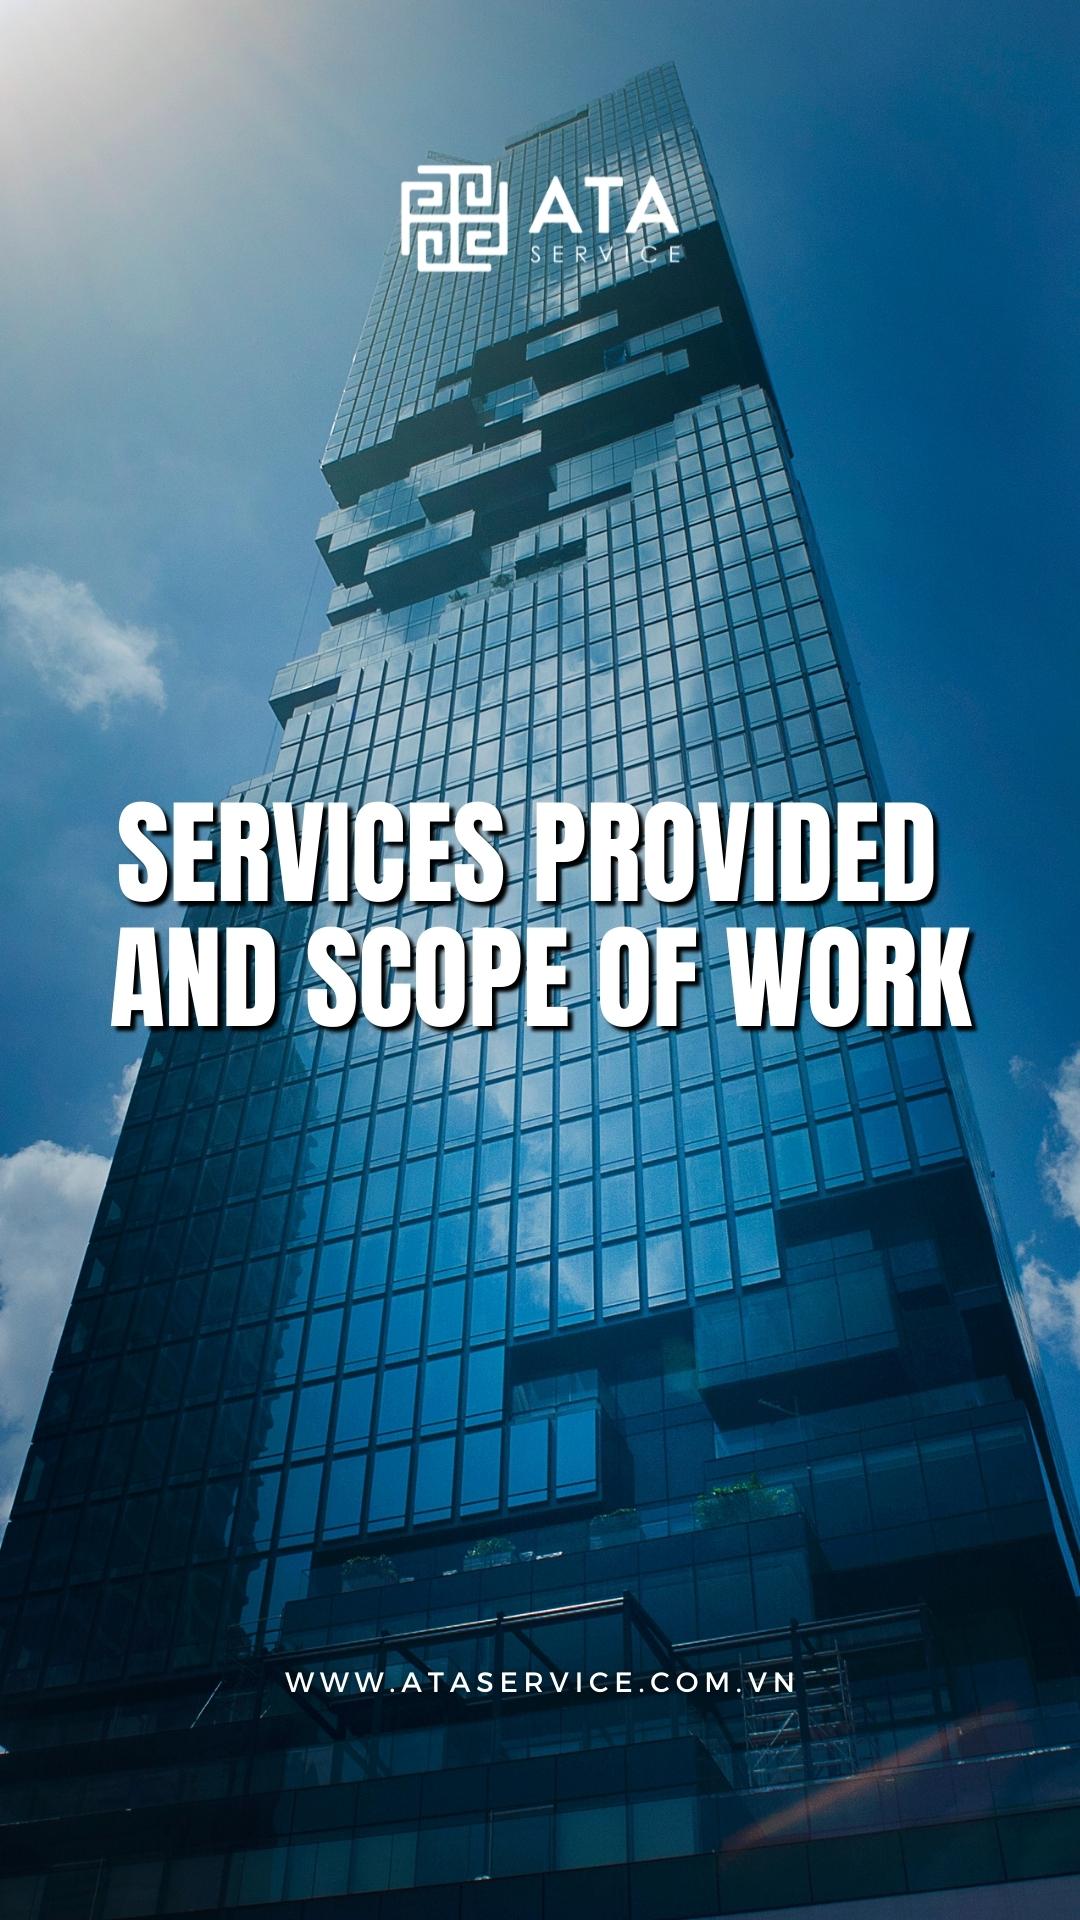 SERVICES PROVIDED AND SCOPE OF WORK